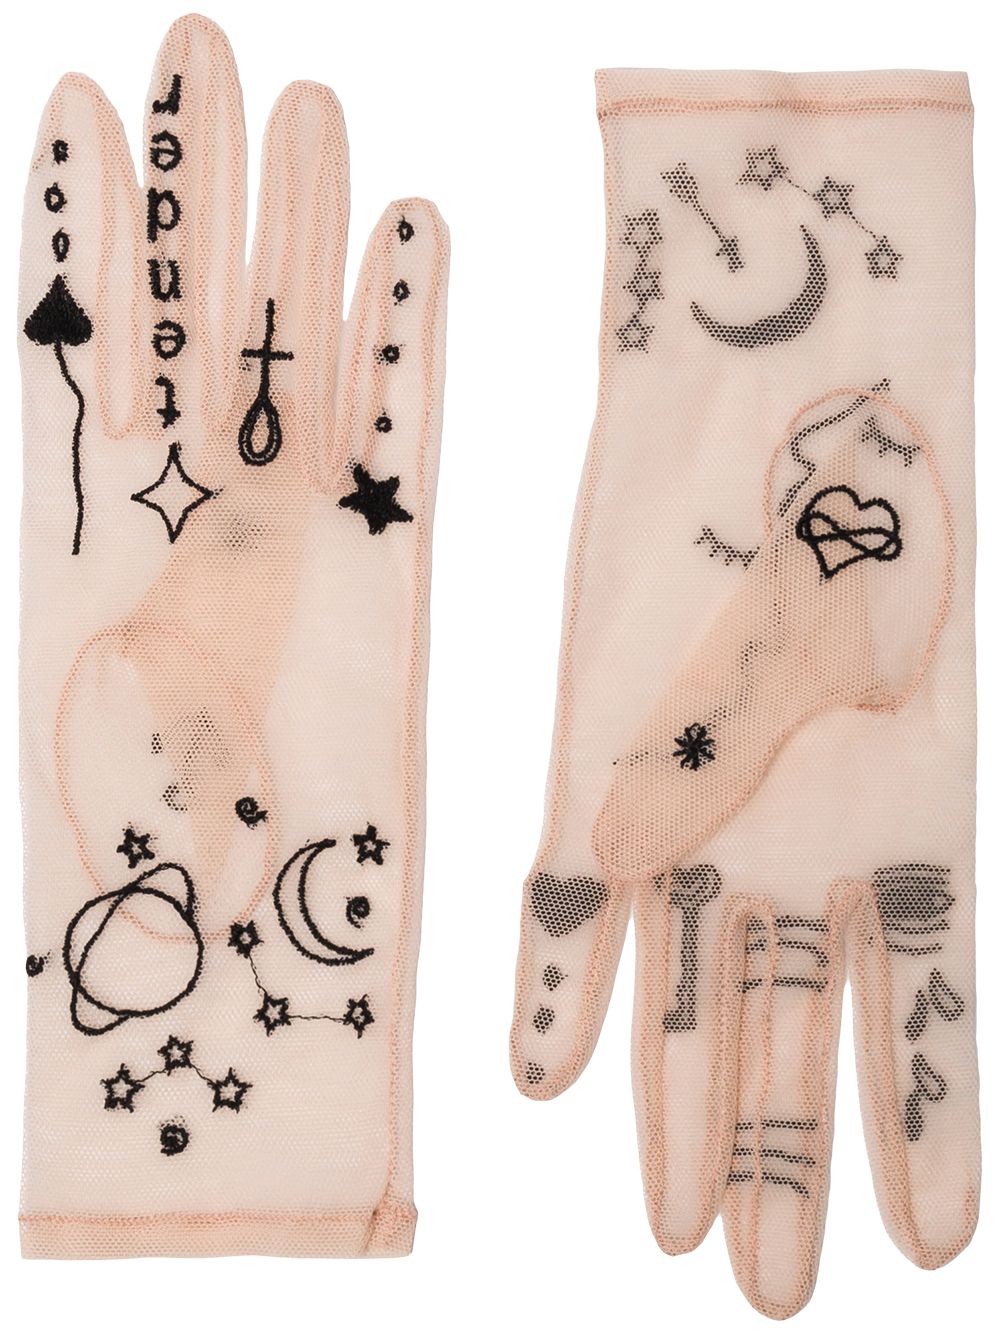 TENDER AND DANGEROUS EMBROIDERED GLOVES